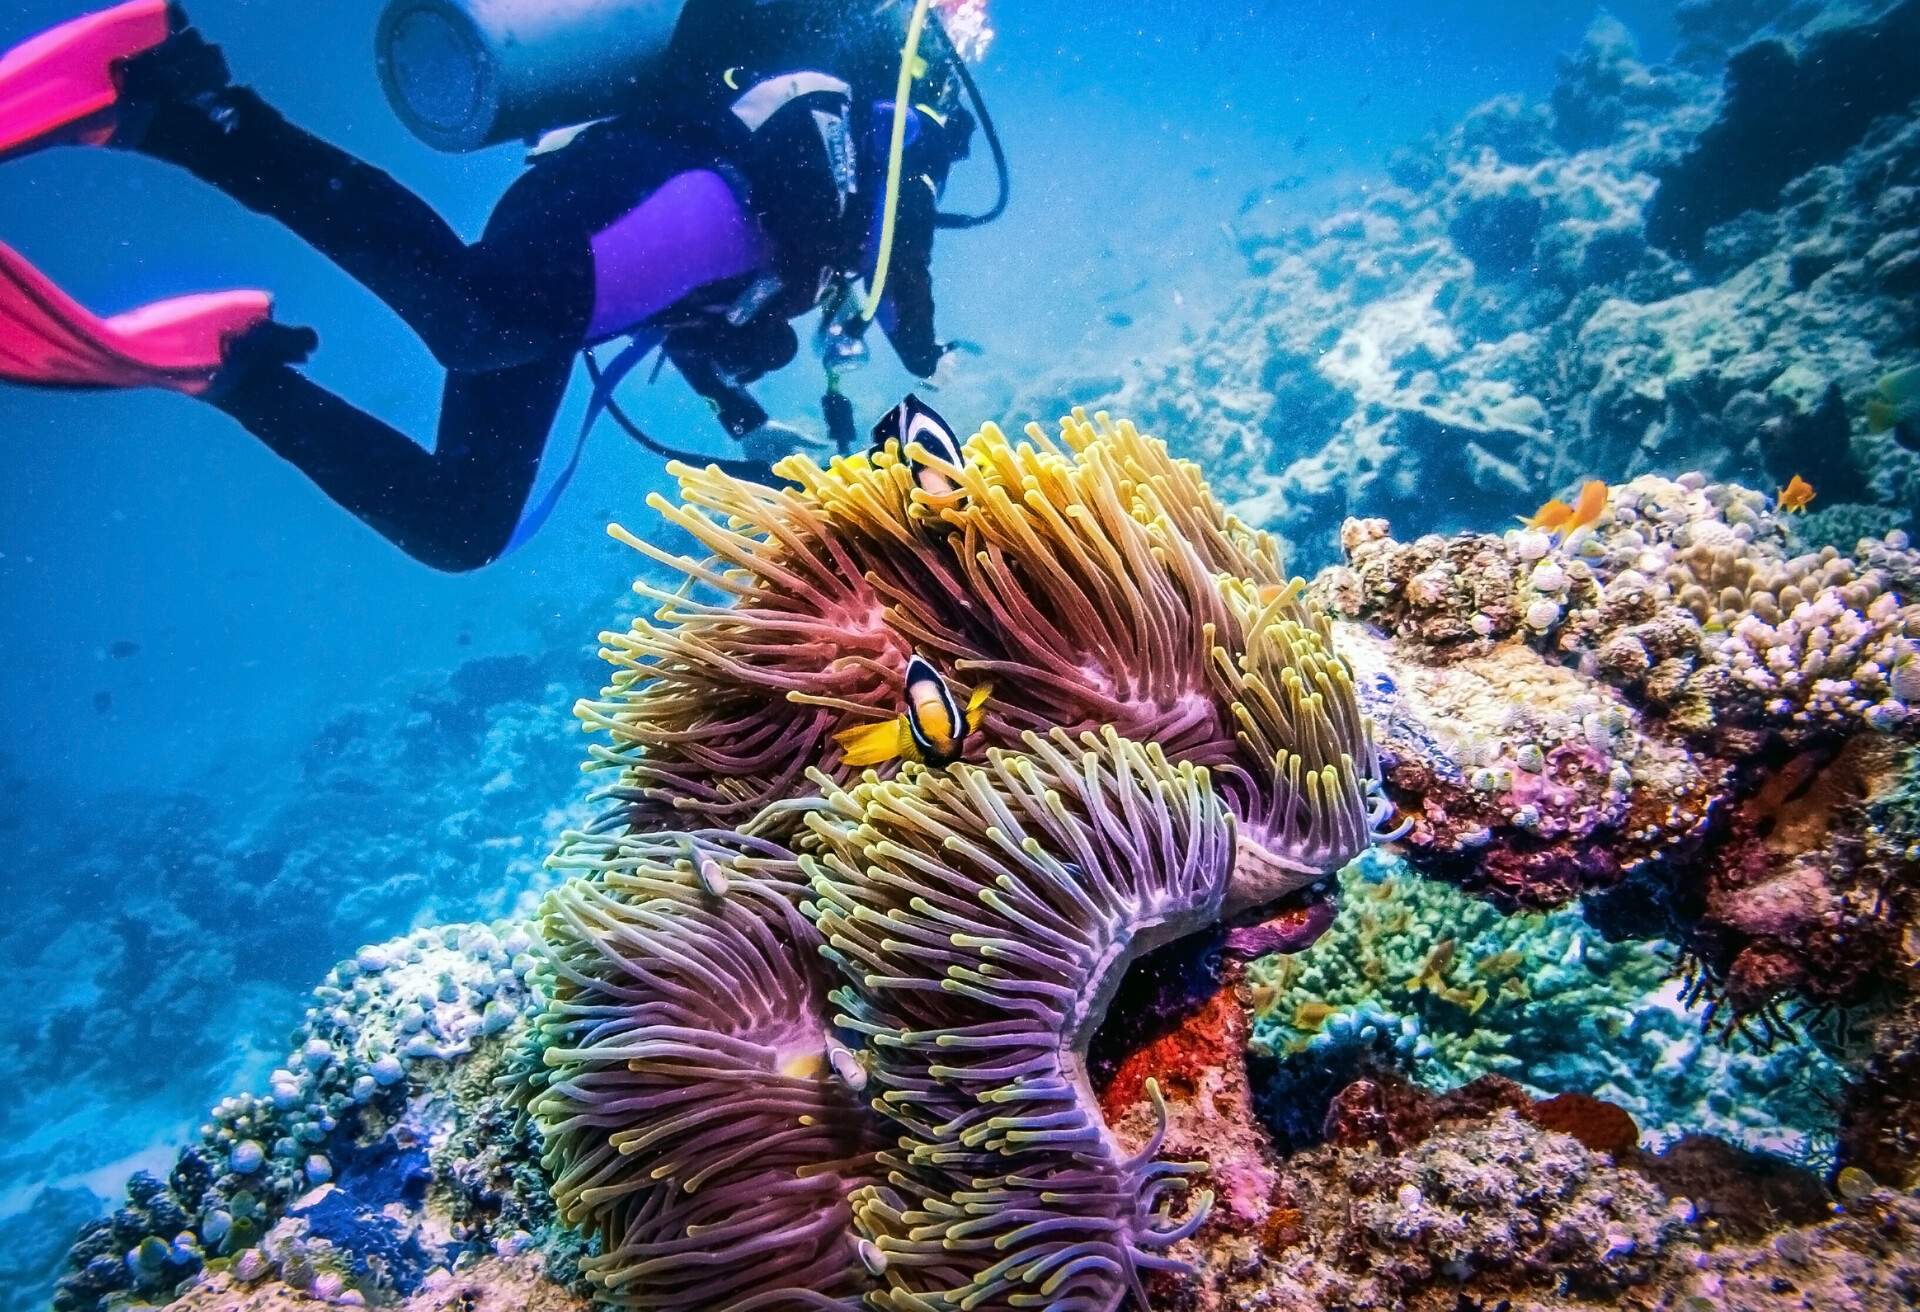 A Diver exploring coral reef. Two clownfish with actinia